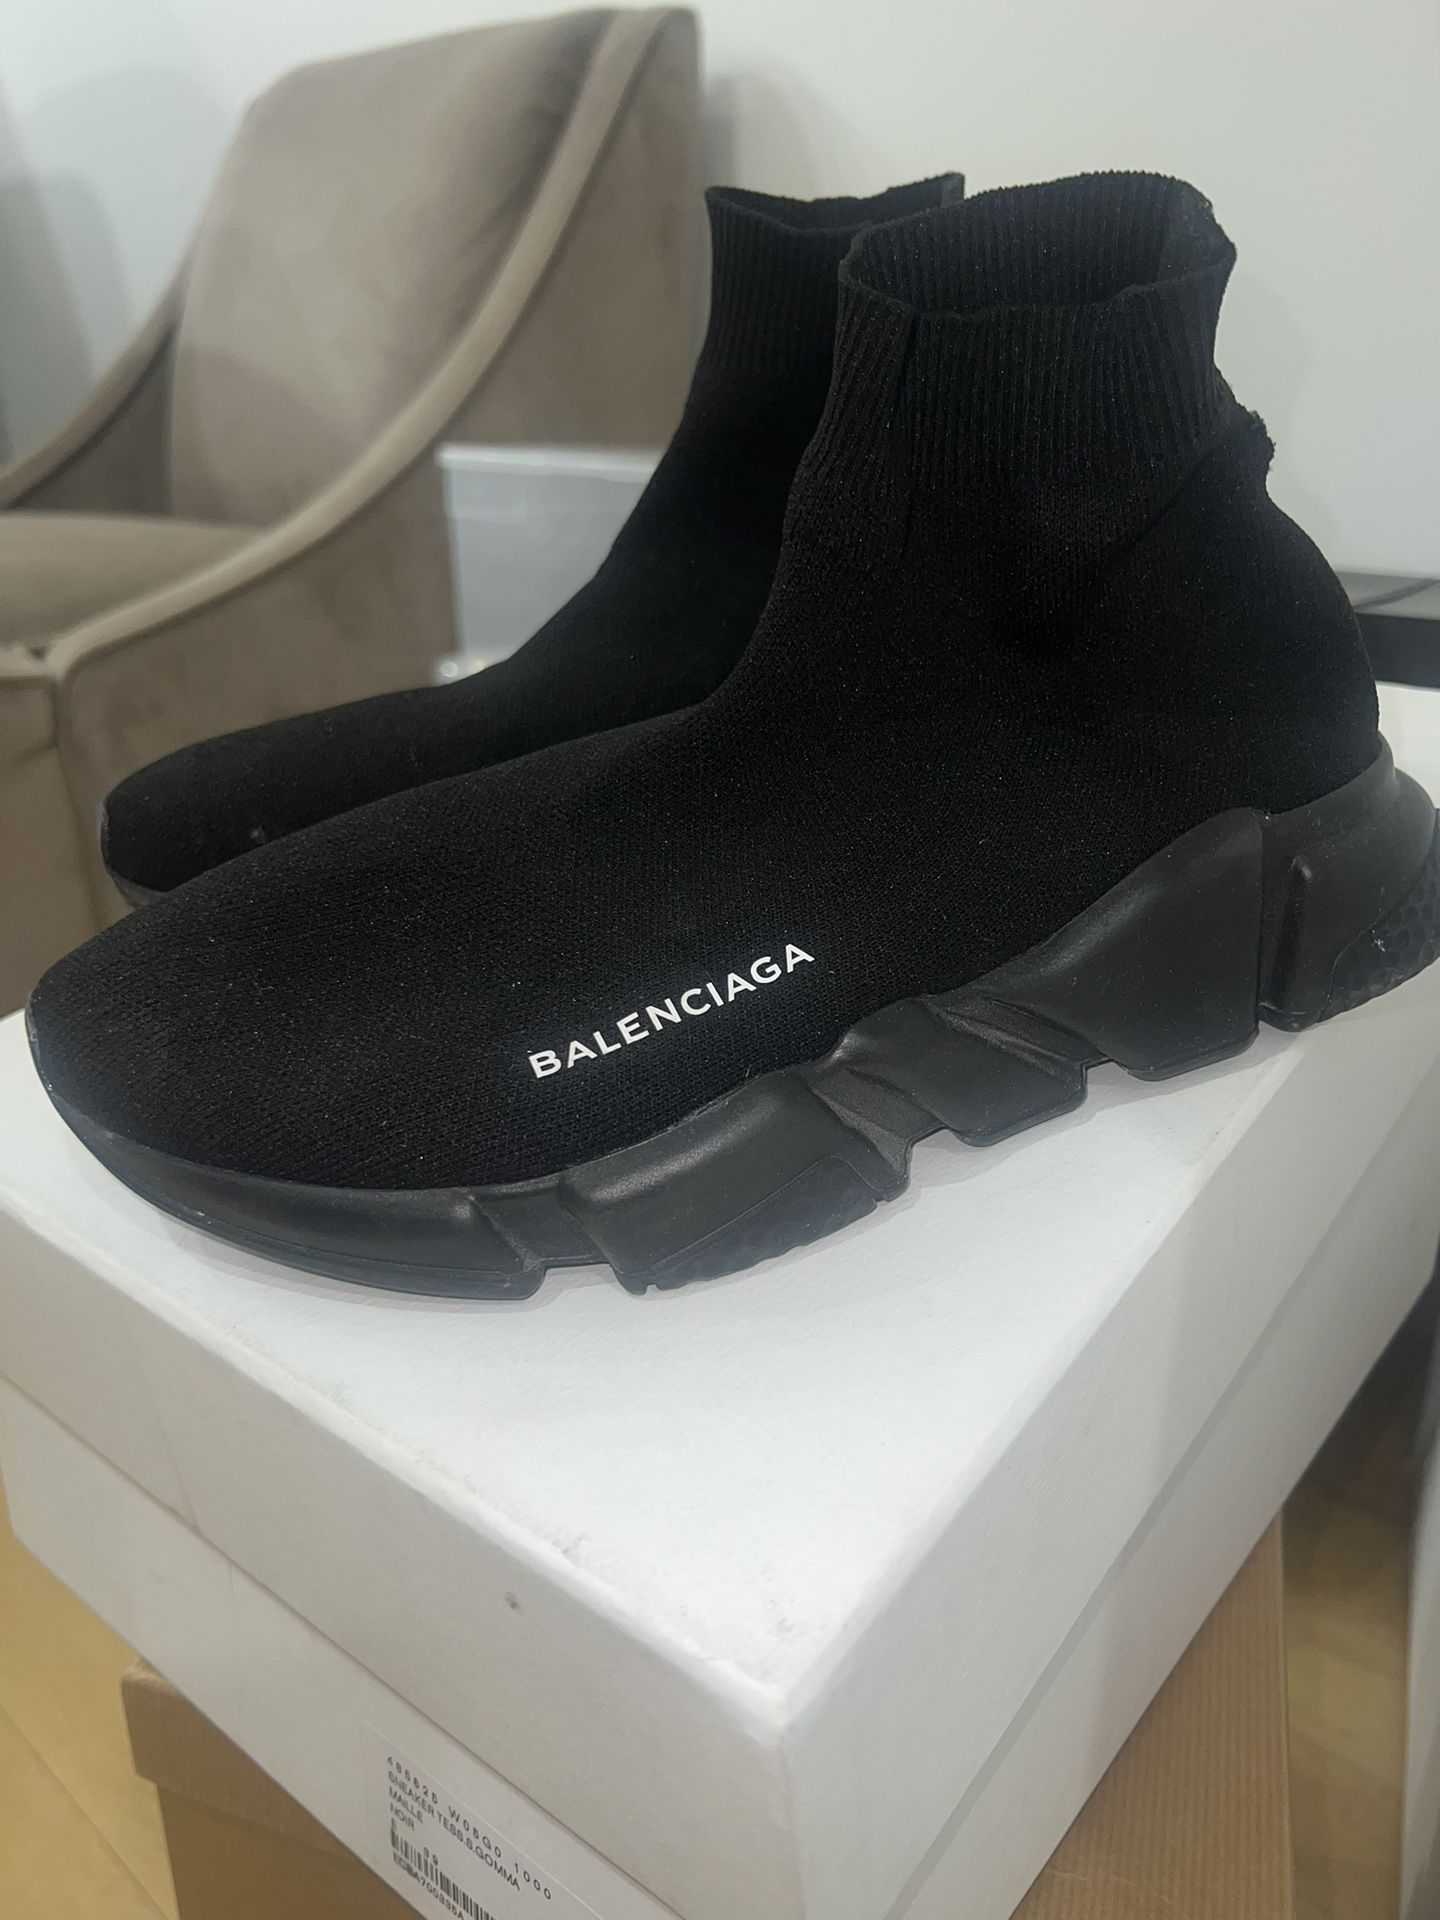 Balenciagas Shoes for Sale in New York, New York - OfferUp